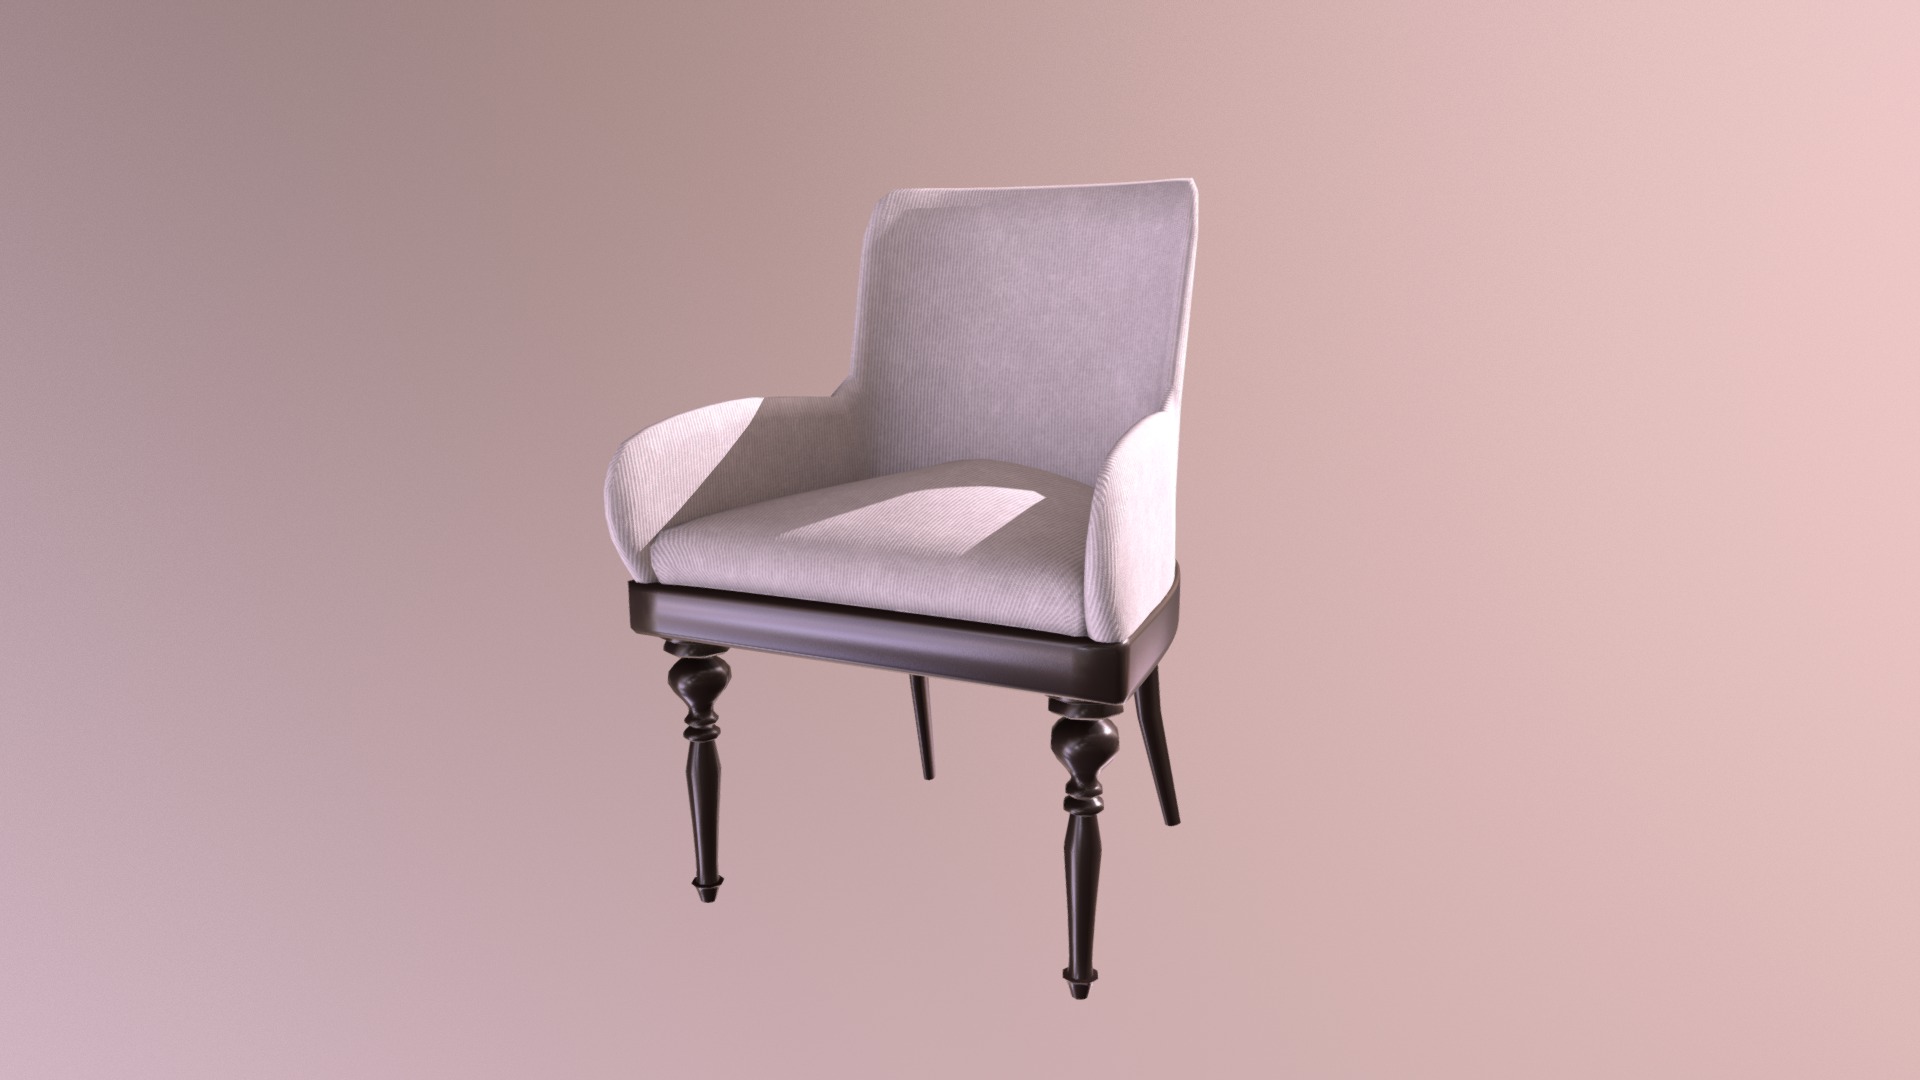 3D model CHAIR - This is a 3D model of the CHAIR. The 3D model is about a white chair with a cushion.